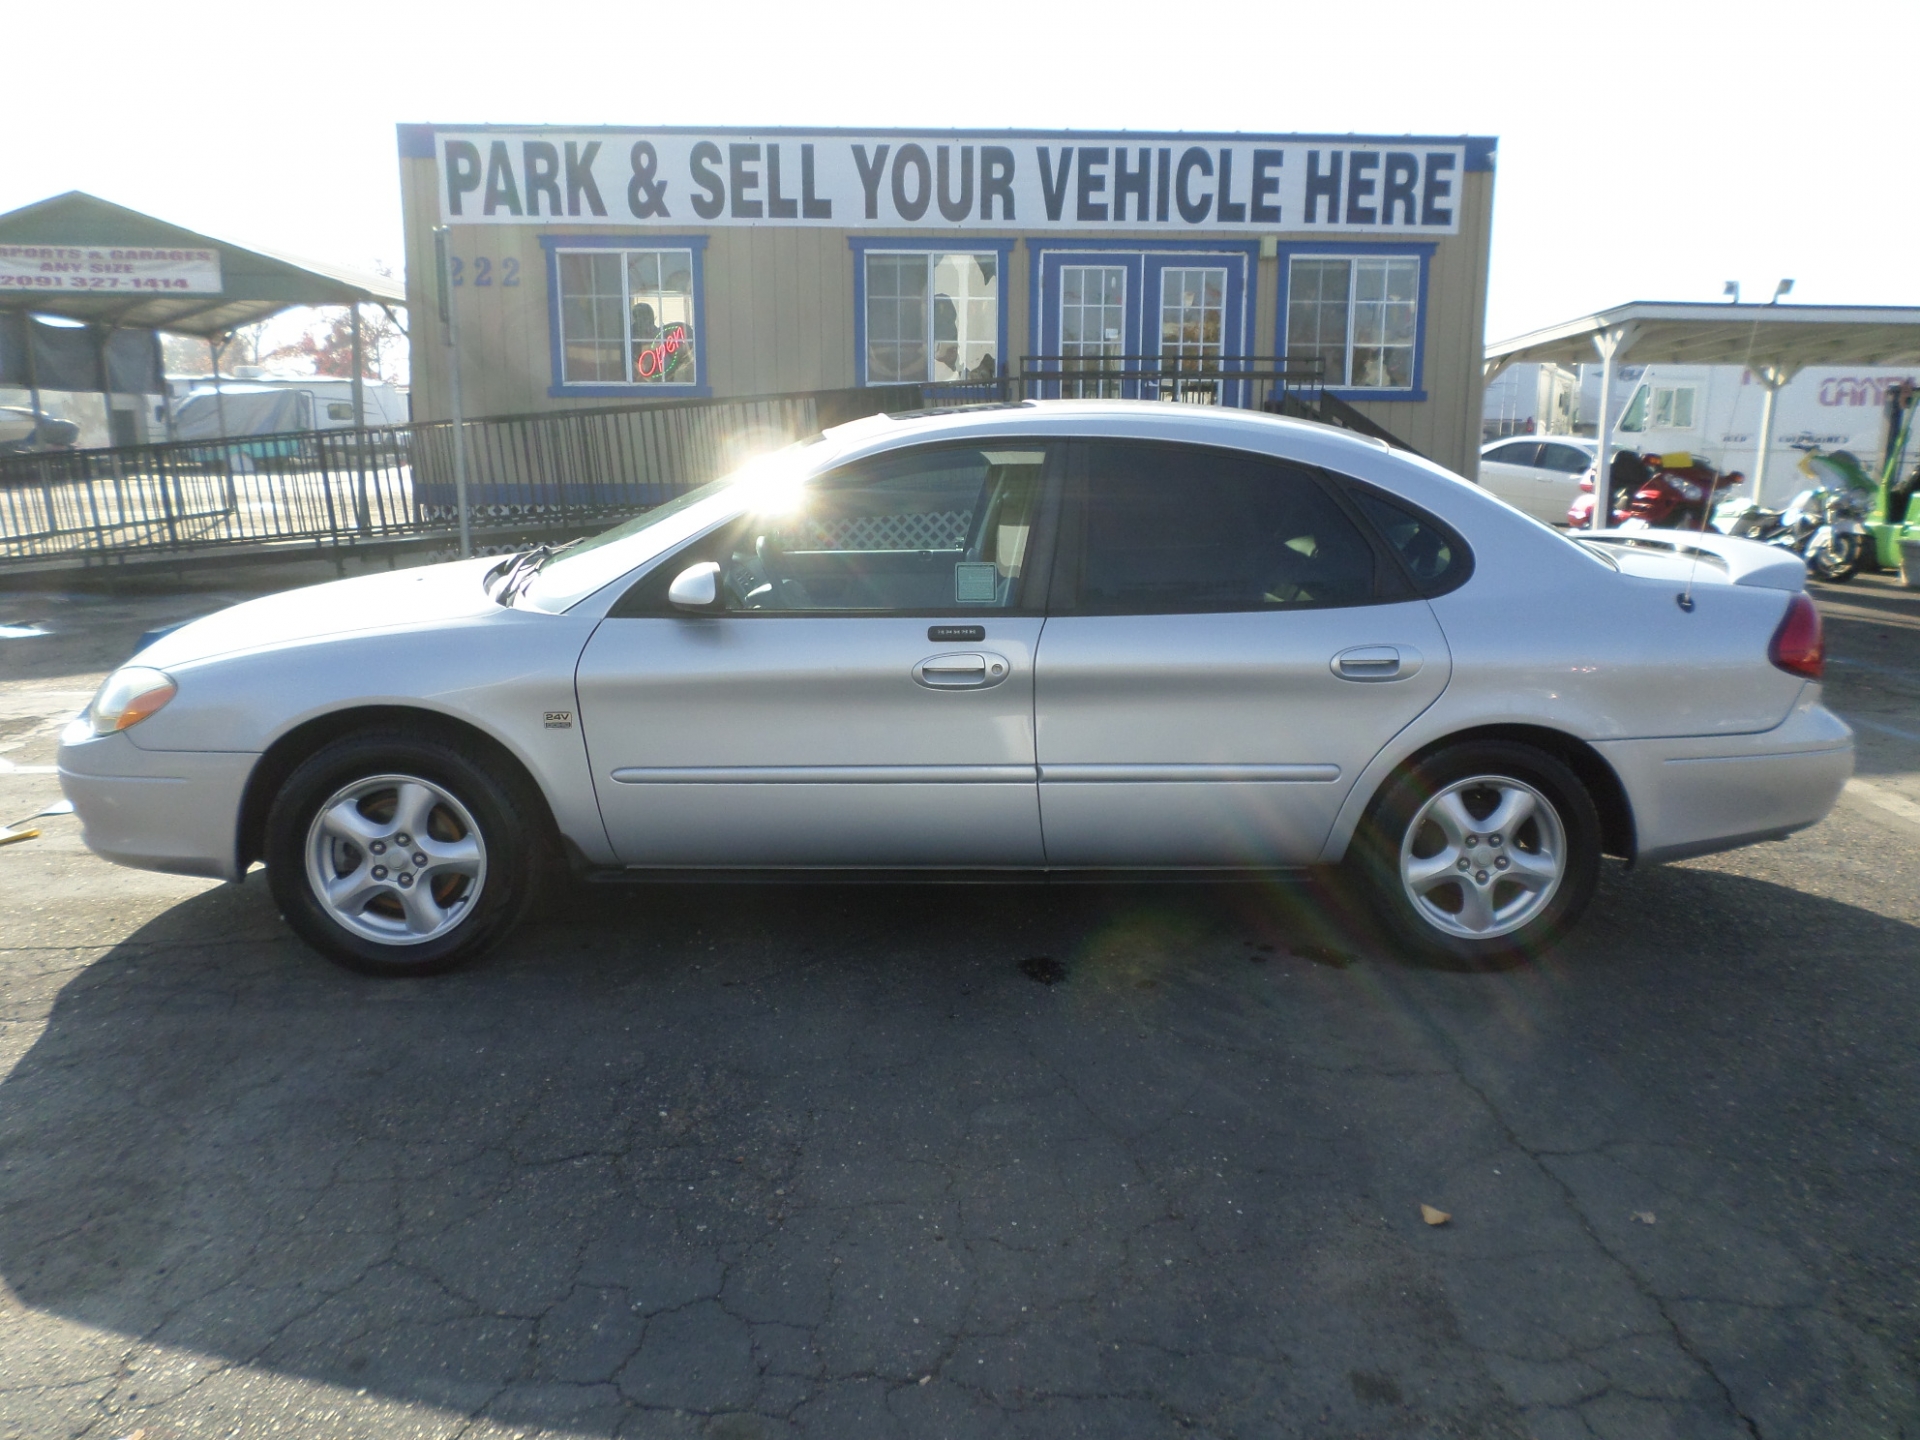 Car For Sale 2003 Ford Taurus Ses In Lodi Stockton Ca Lodi Park And Sell